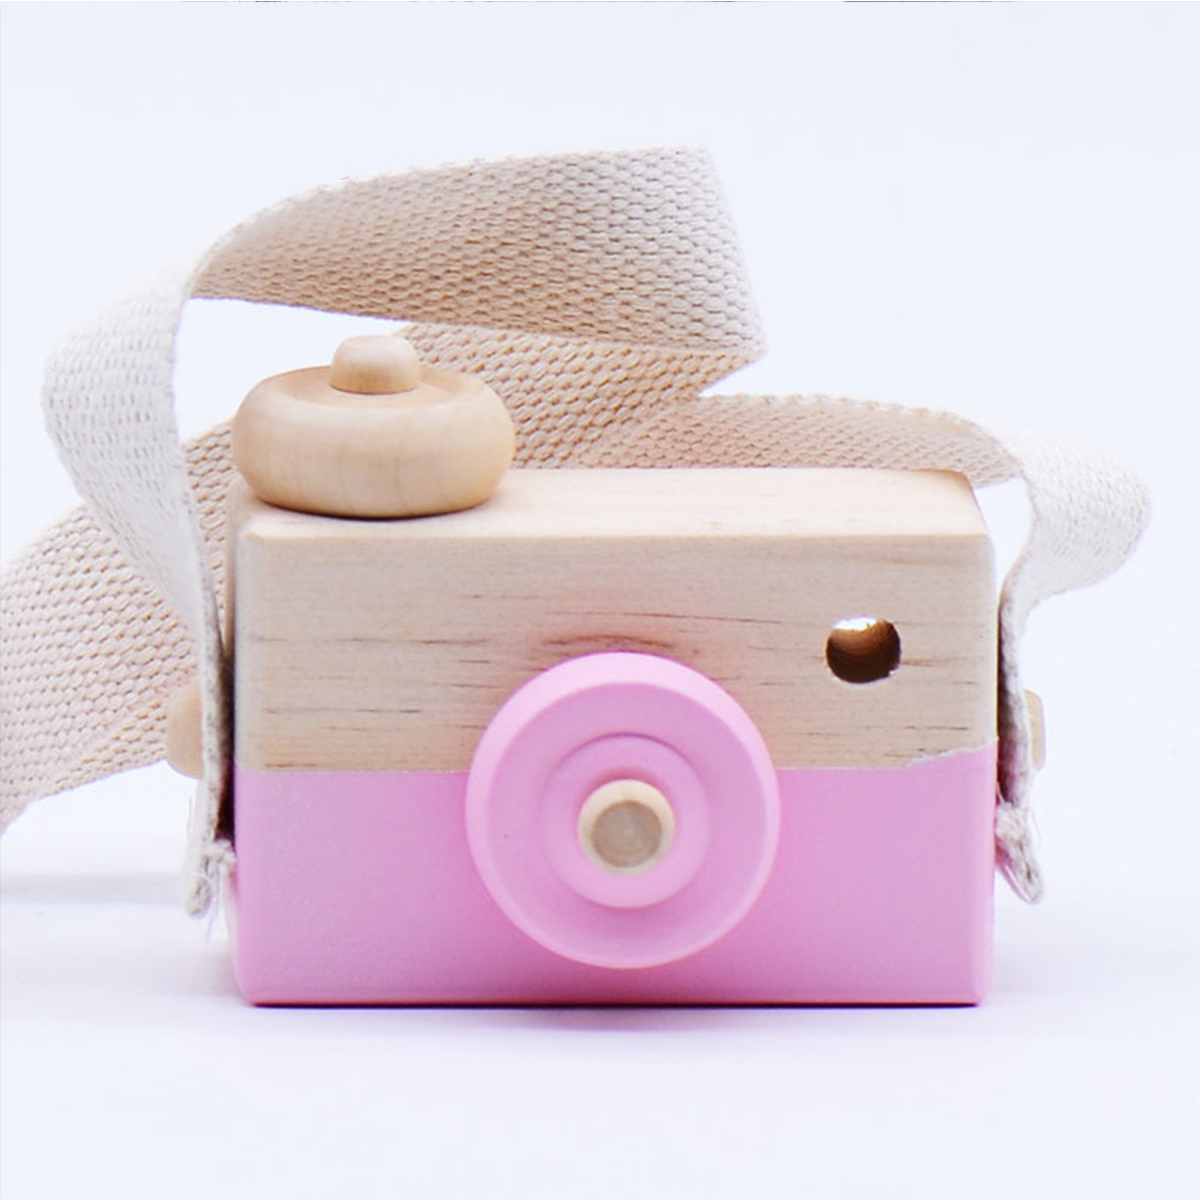 Wearable-Childrens-Wooden-Camera-Ornaments-Mini-Portable-Educational-Toys-Photography-Cute-Props-1573498-5